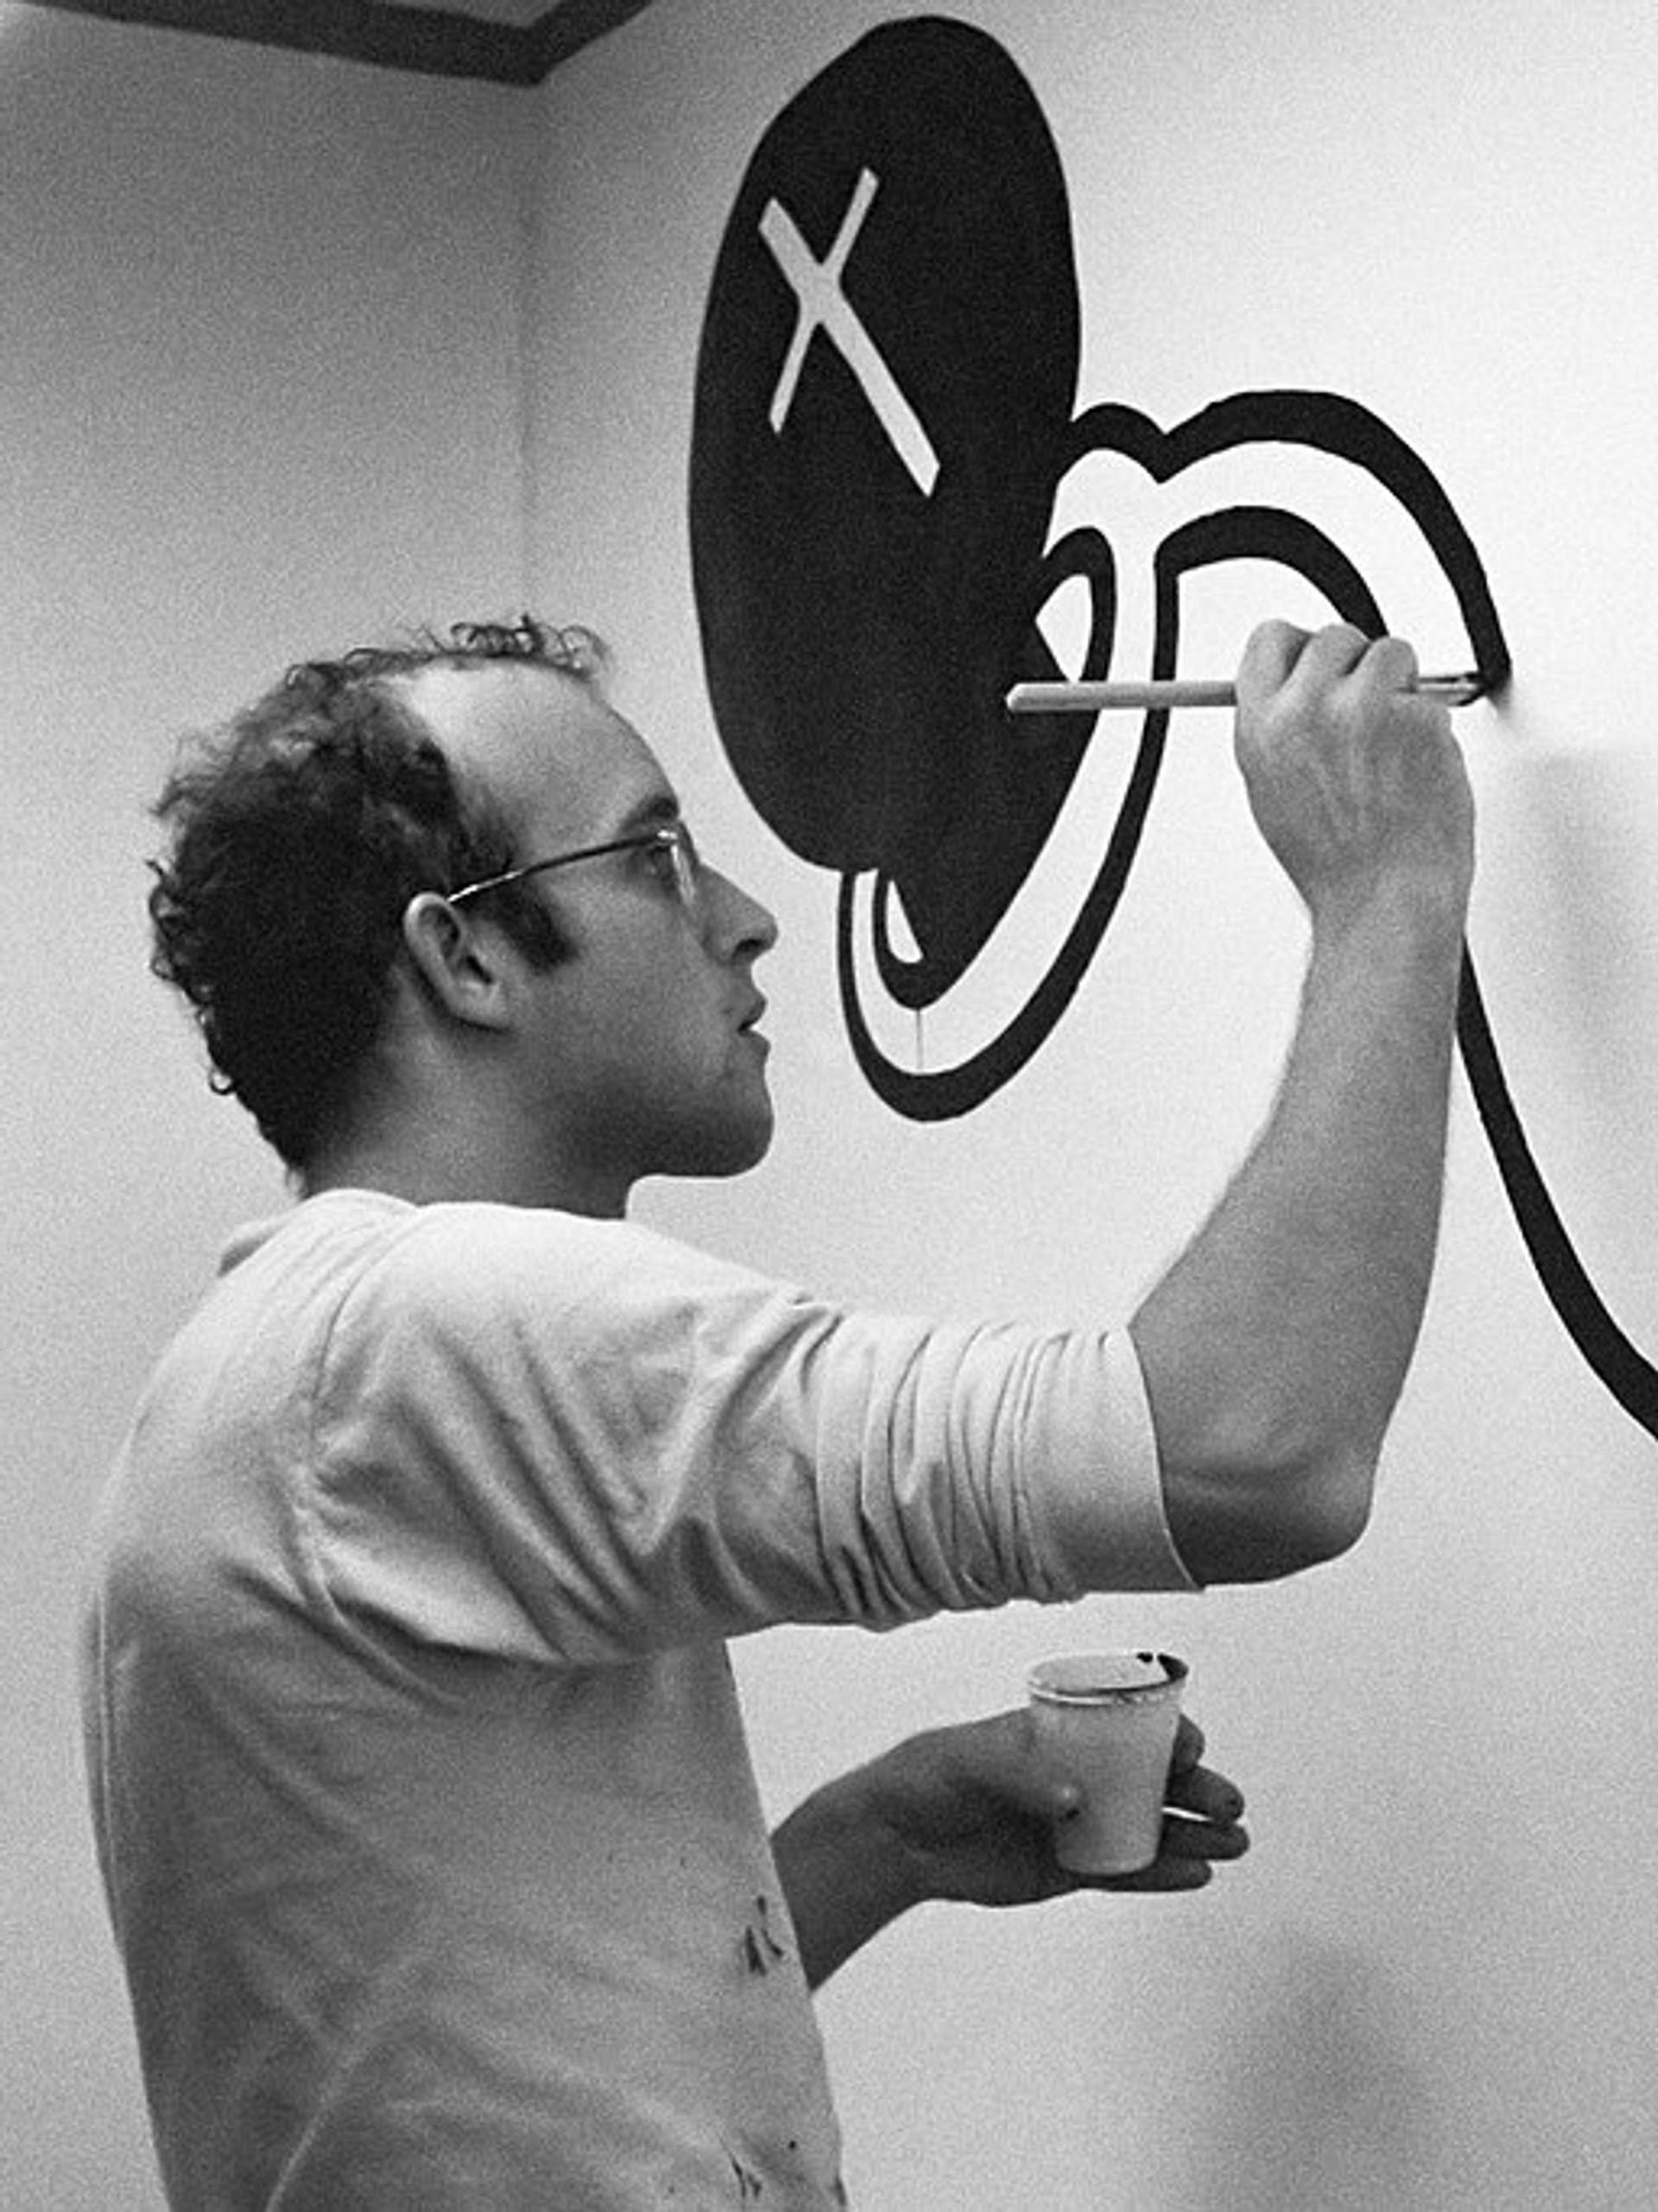 The Life & Legacy of Keith Haring: From Street Art to the Gallery